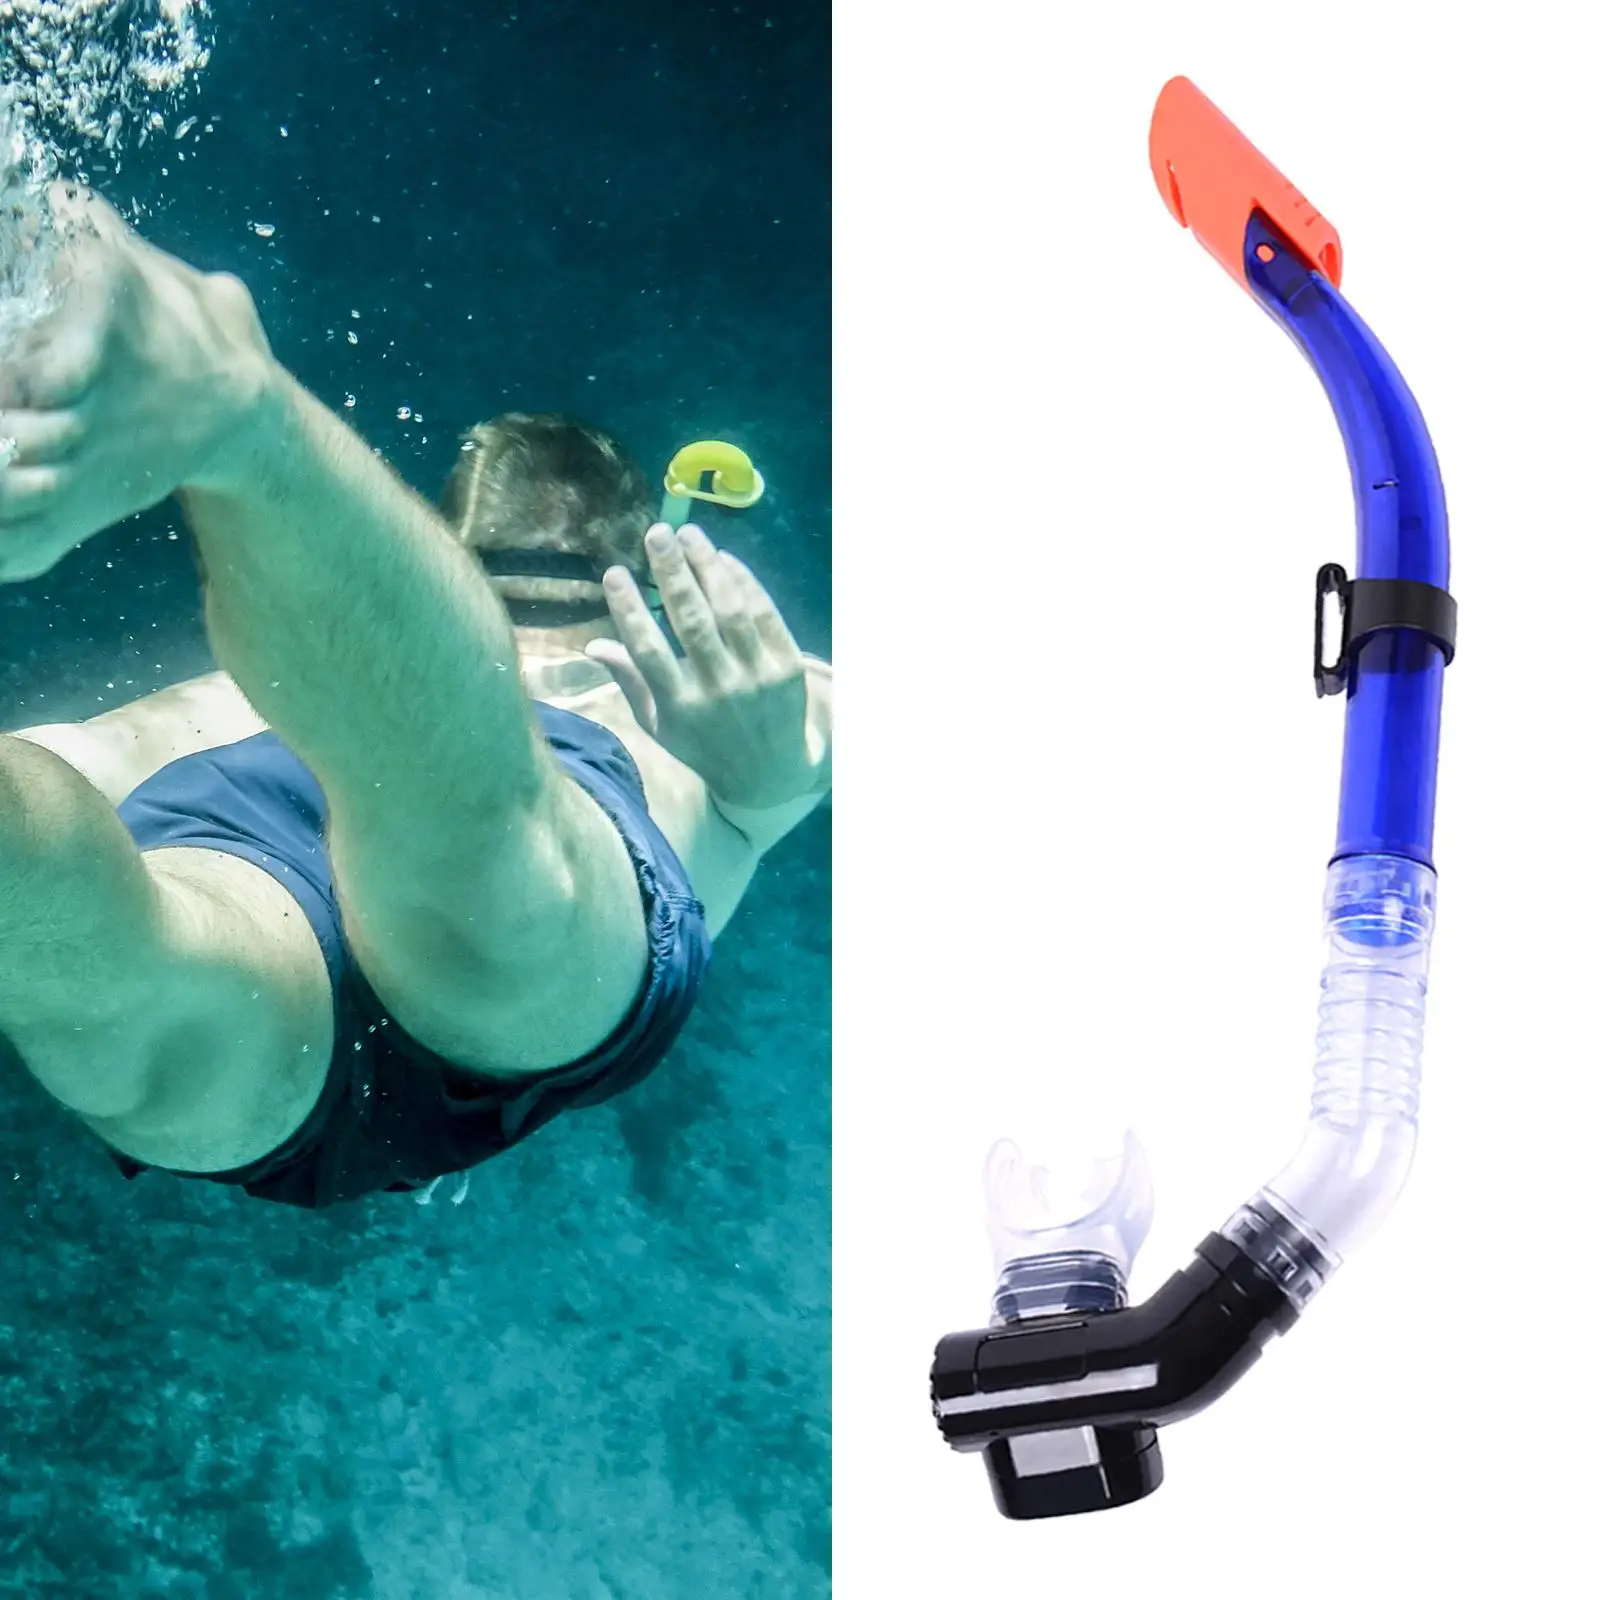 Semi Dry Snorkel Tube Comfortable Mouthpiece for Water Scuba Swimming Training Diving Snorkeling